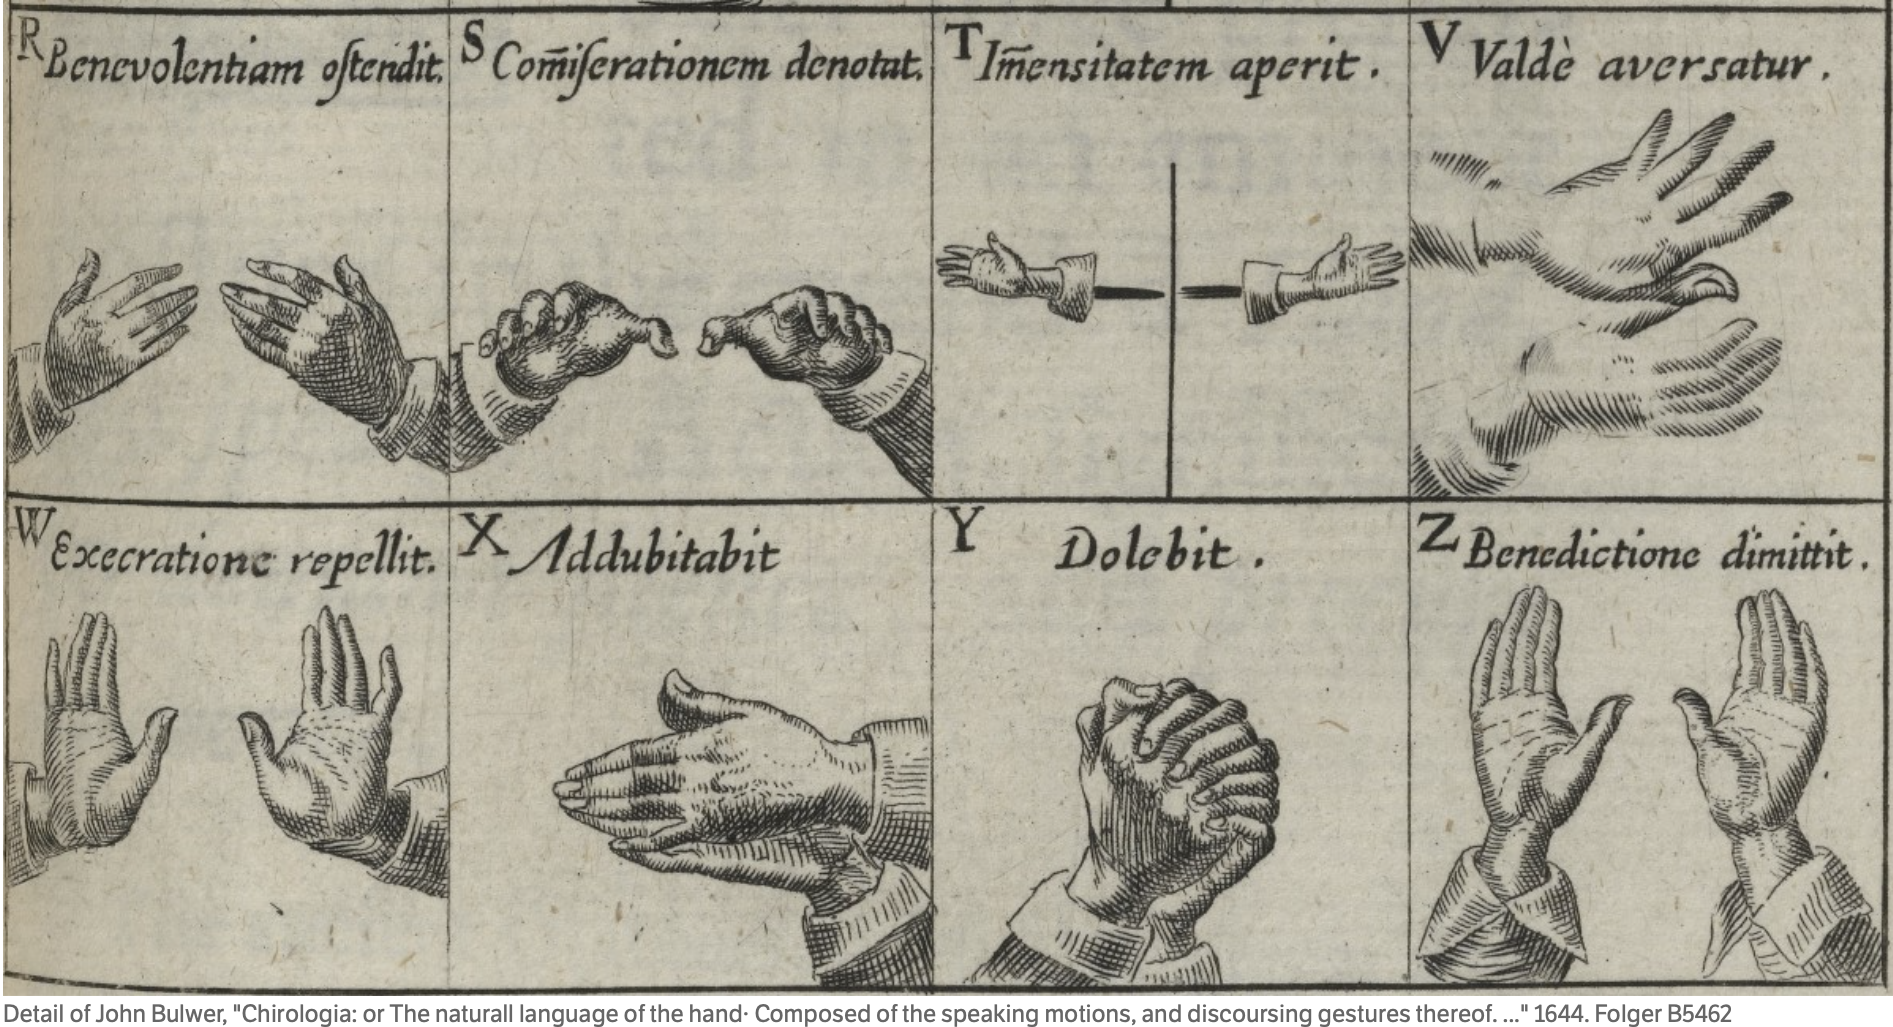 Illustration of eight hand gestures arranged in a grid demonstrating early modern sign language letters of R, S, T, V, W, X, Y, and Z, accompanied by Latin phrases Detail of John Bulwer, "Chirologia: or The naturall language of the hand· Composed of the speaking motions, and discoursing gestures thereof. ..." 1644. Folger B5462